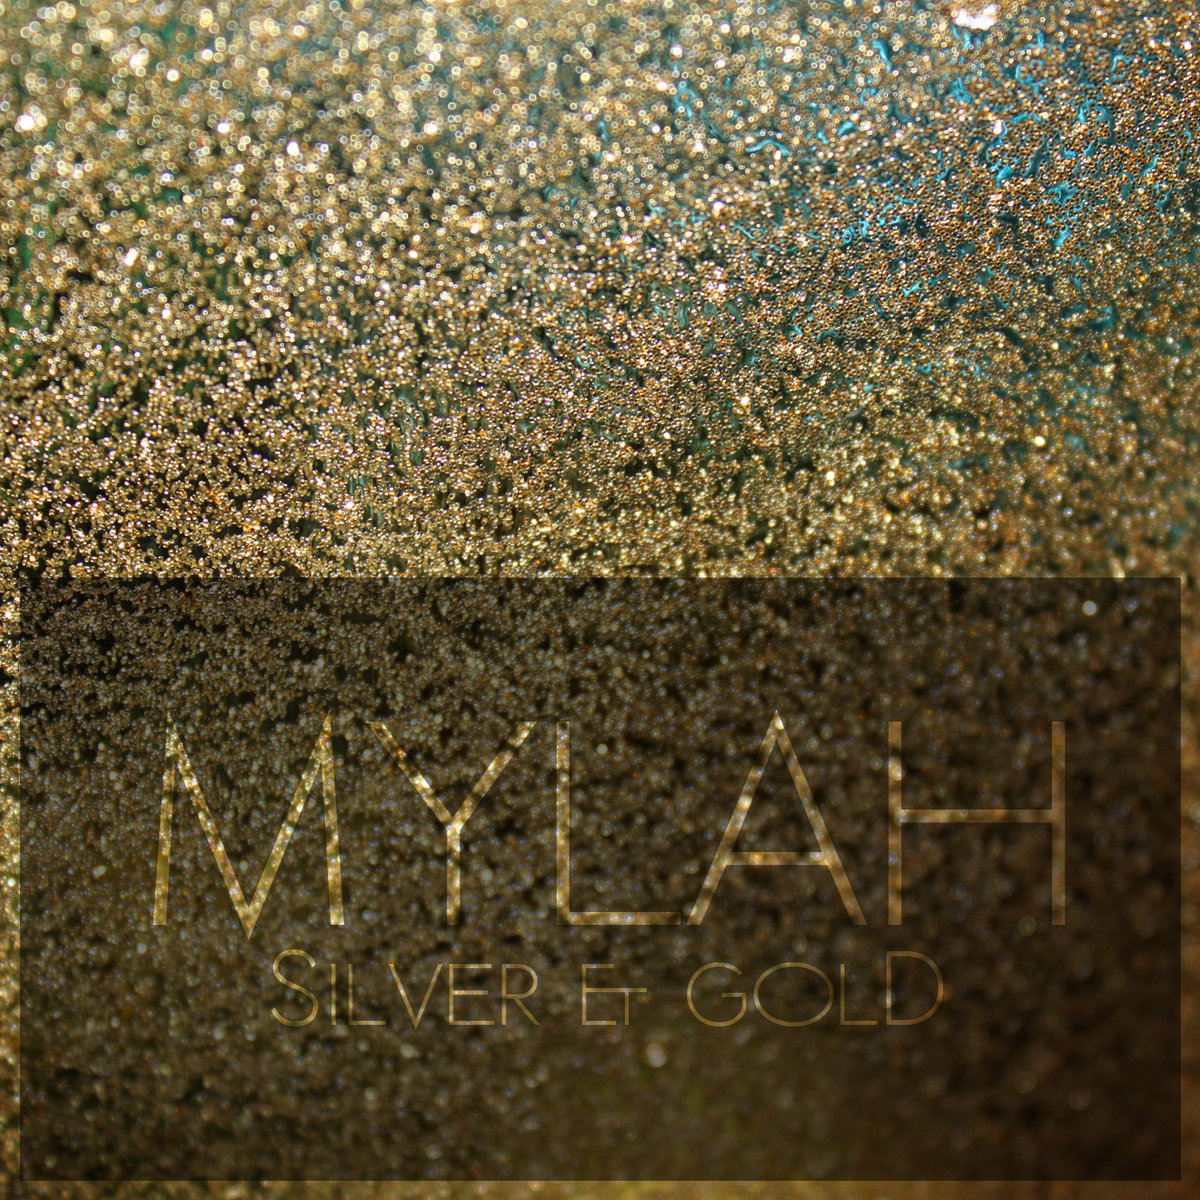 Mylah Silver and Gold EP